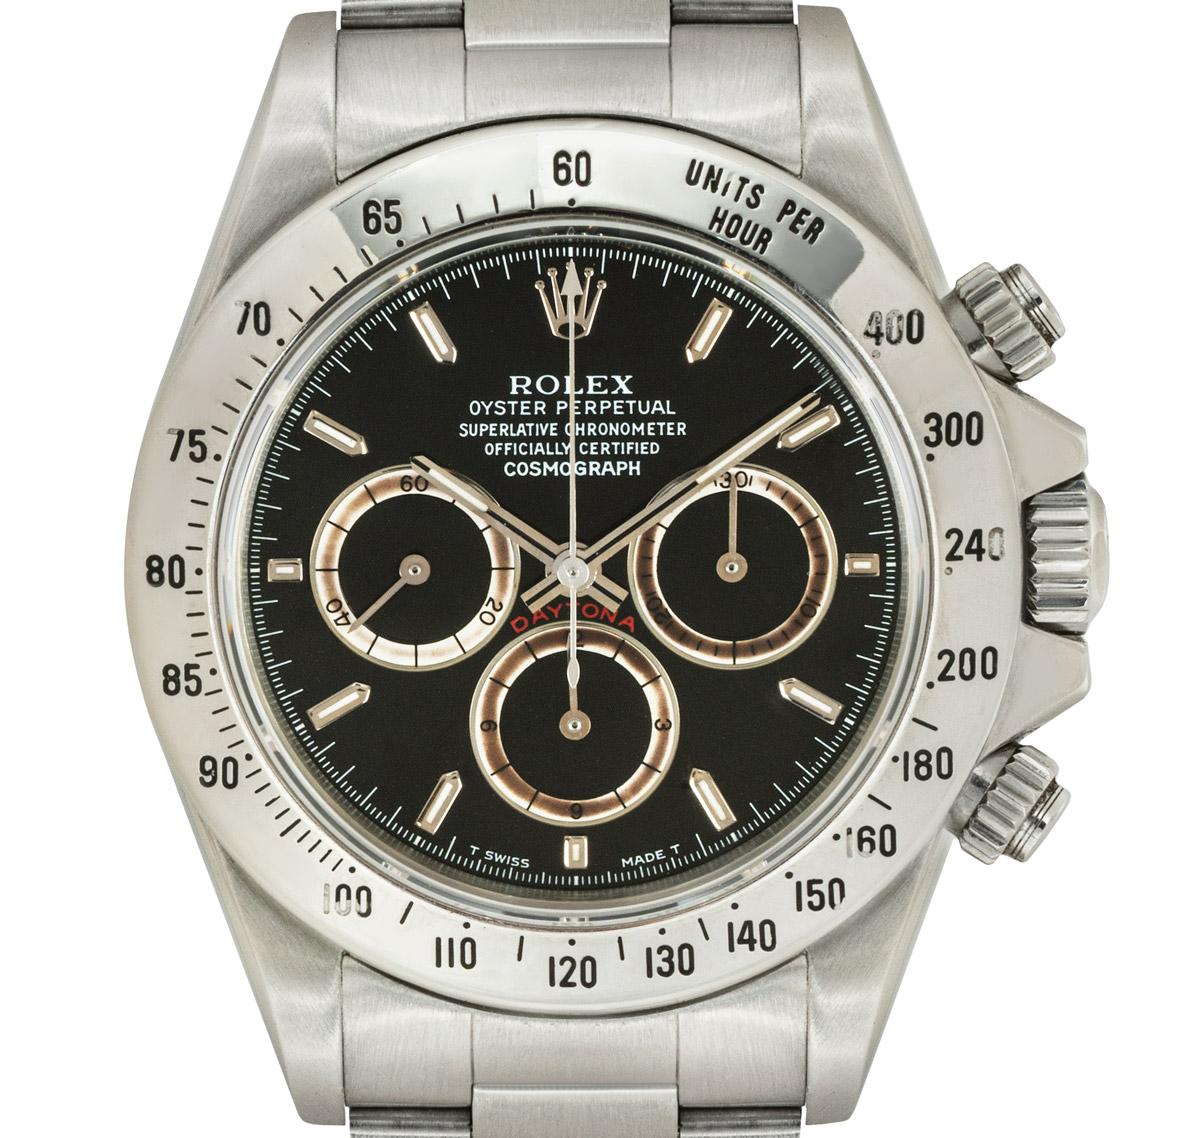 A rare stainless steel Zenith Daytona by Rolex. Featuring an extremely divisive and unique patrizzi dial. The watch further features an engraved tachymetric scale, three chronograph counters and pushers, the Daytona was designed to be the ultimate